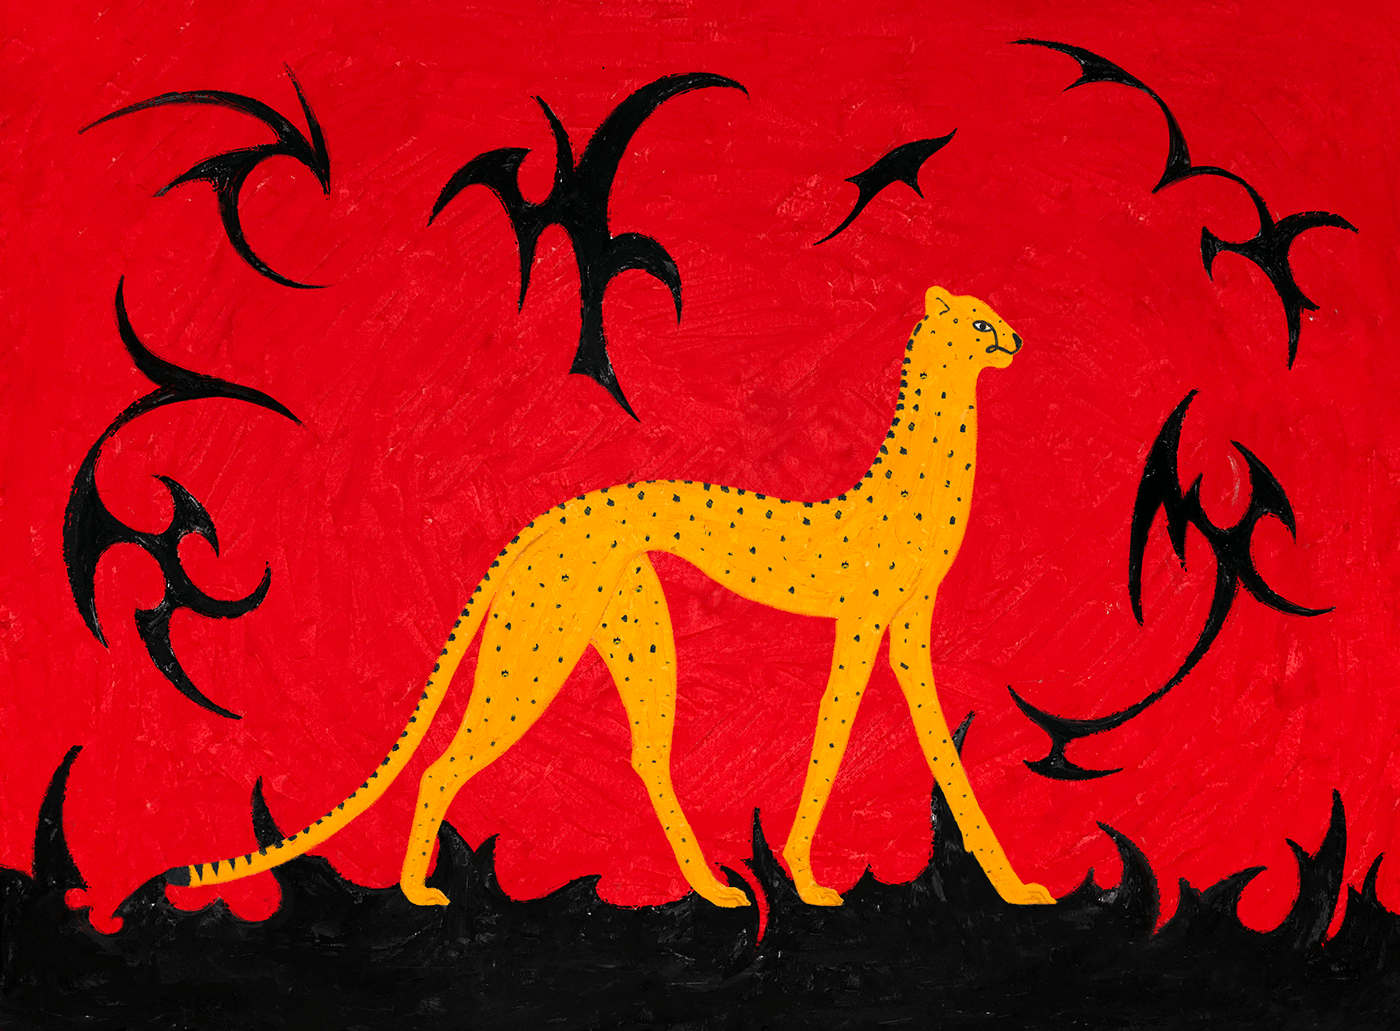 Chimeras within a tribal background.